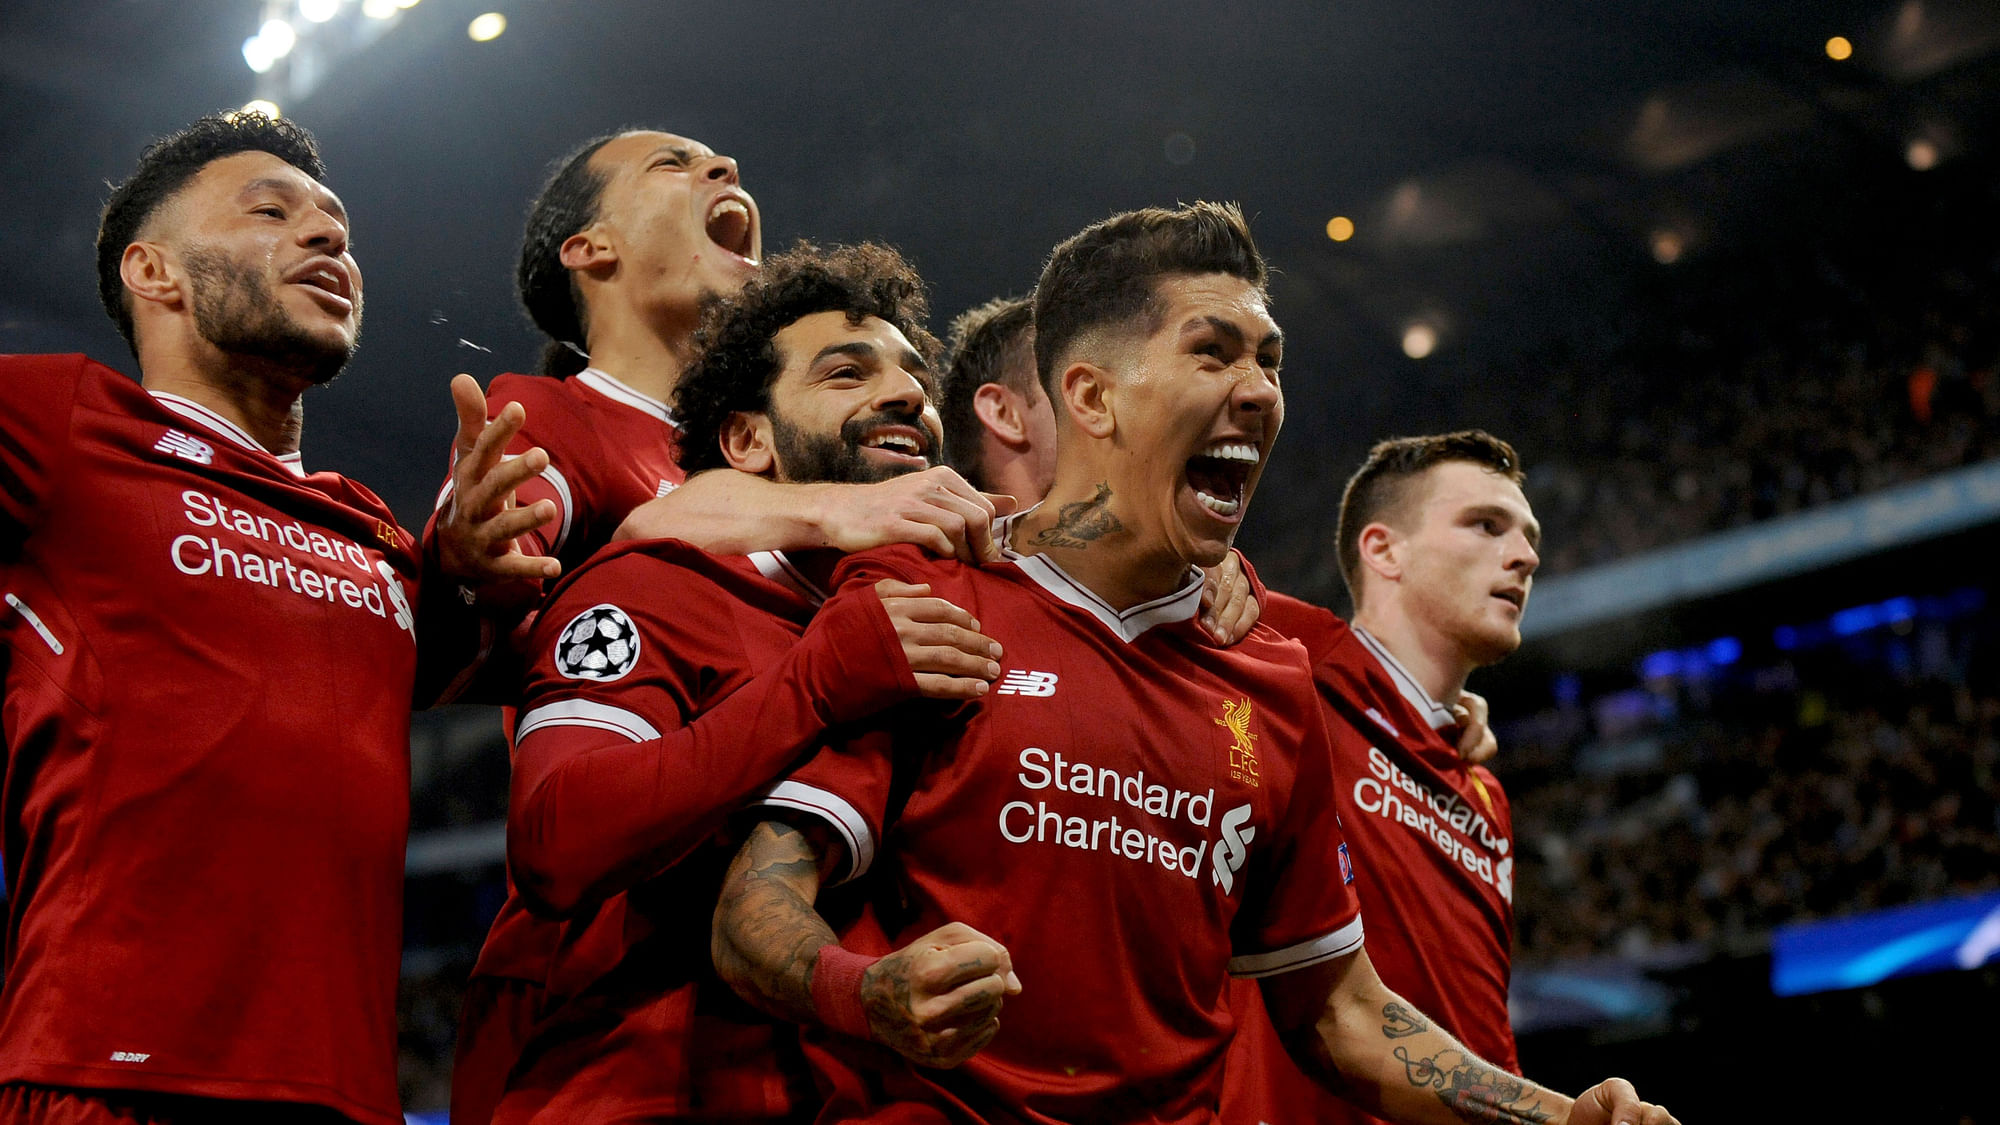 Liverpool moved into the semi-finals of the Champions League.